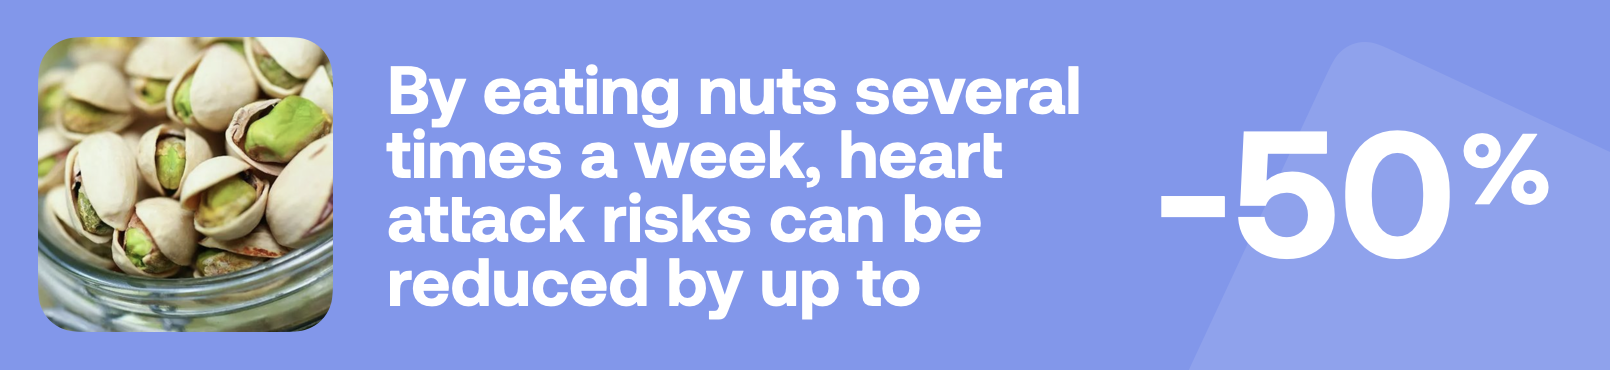 By eating nuts several times a week, heart attack risks can be reduced by up to -50%